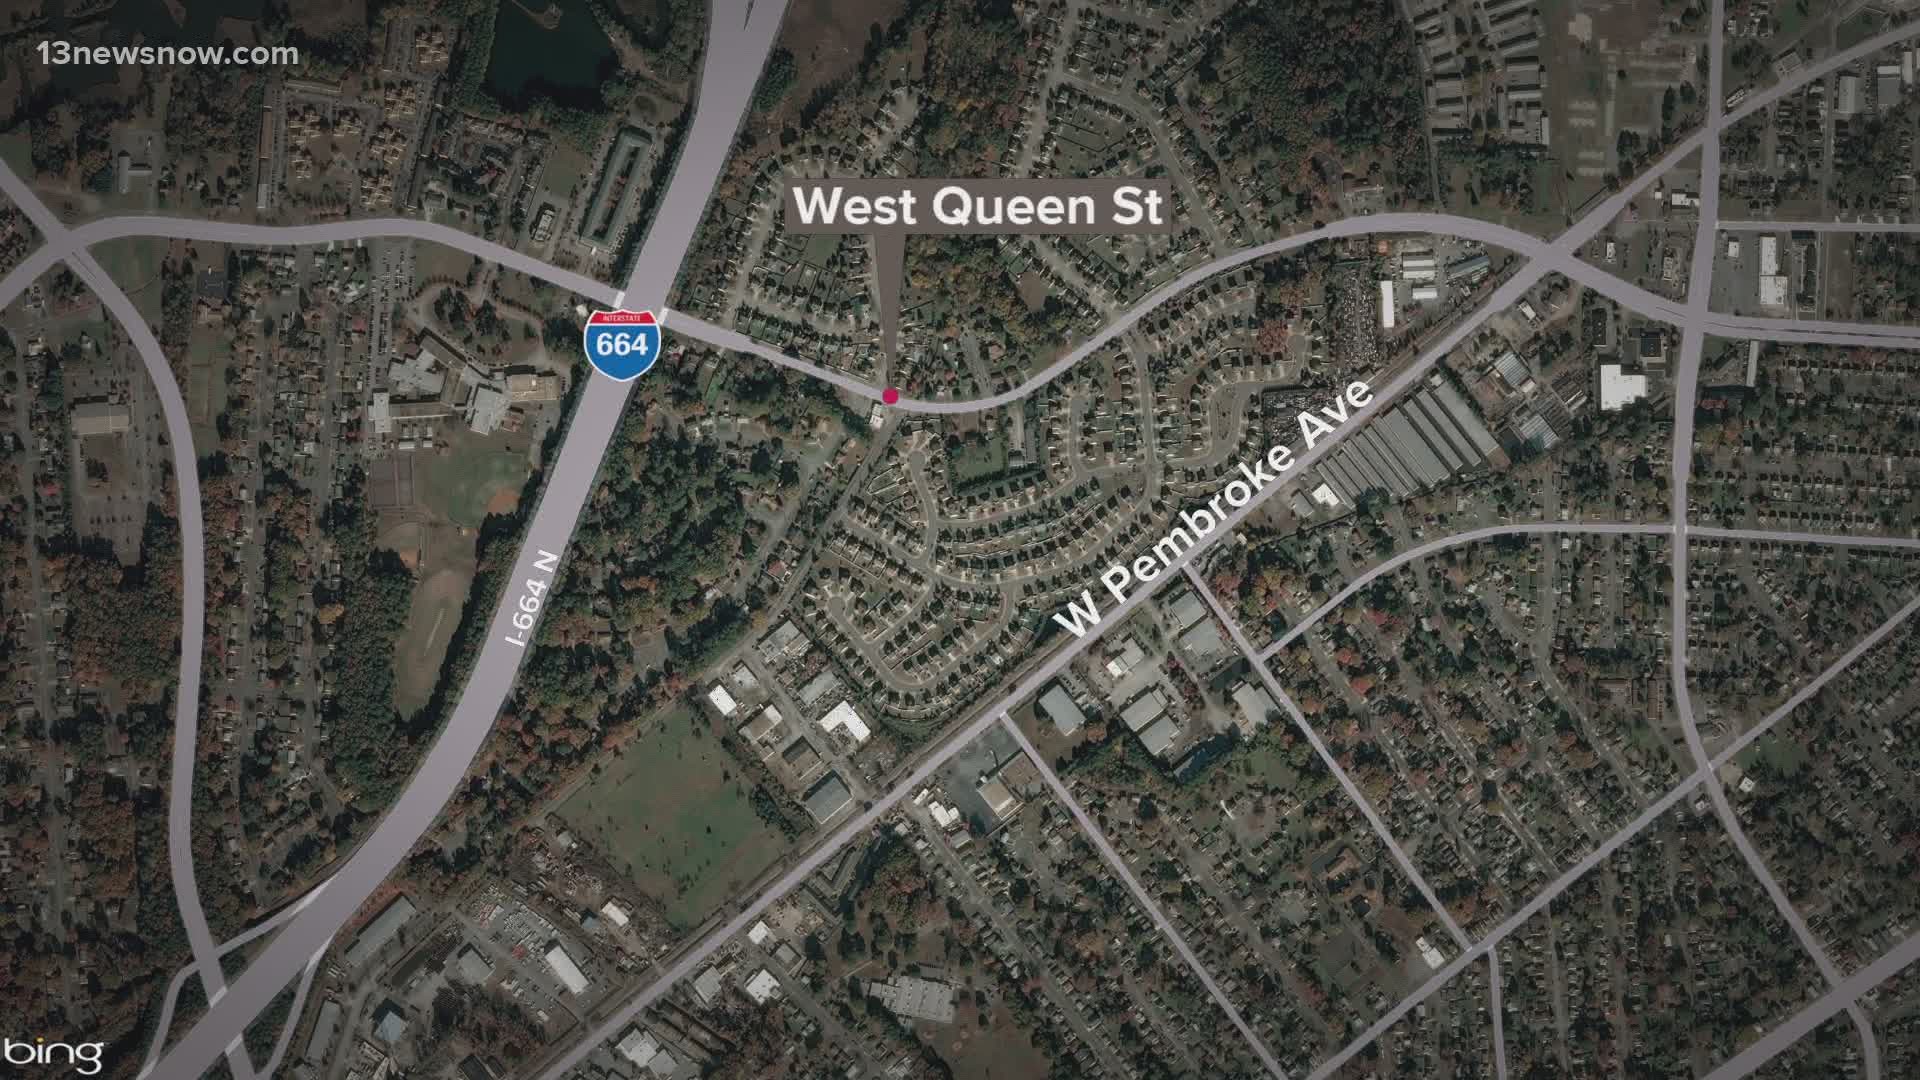 Police say a man was shot on West Queen Street. His injuries are life-threatening.